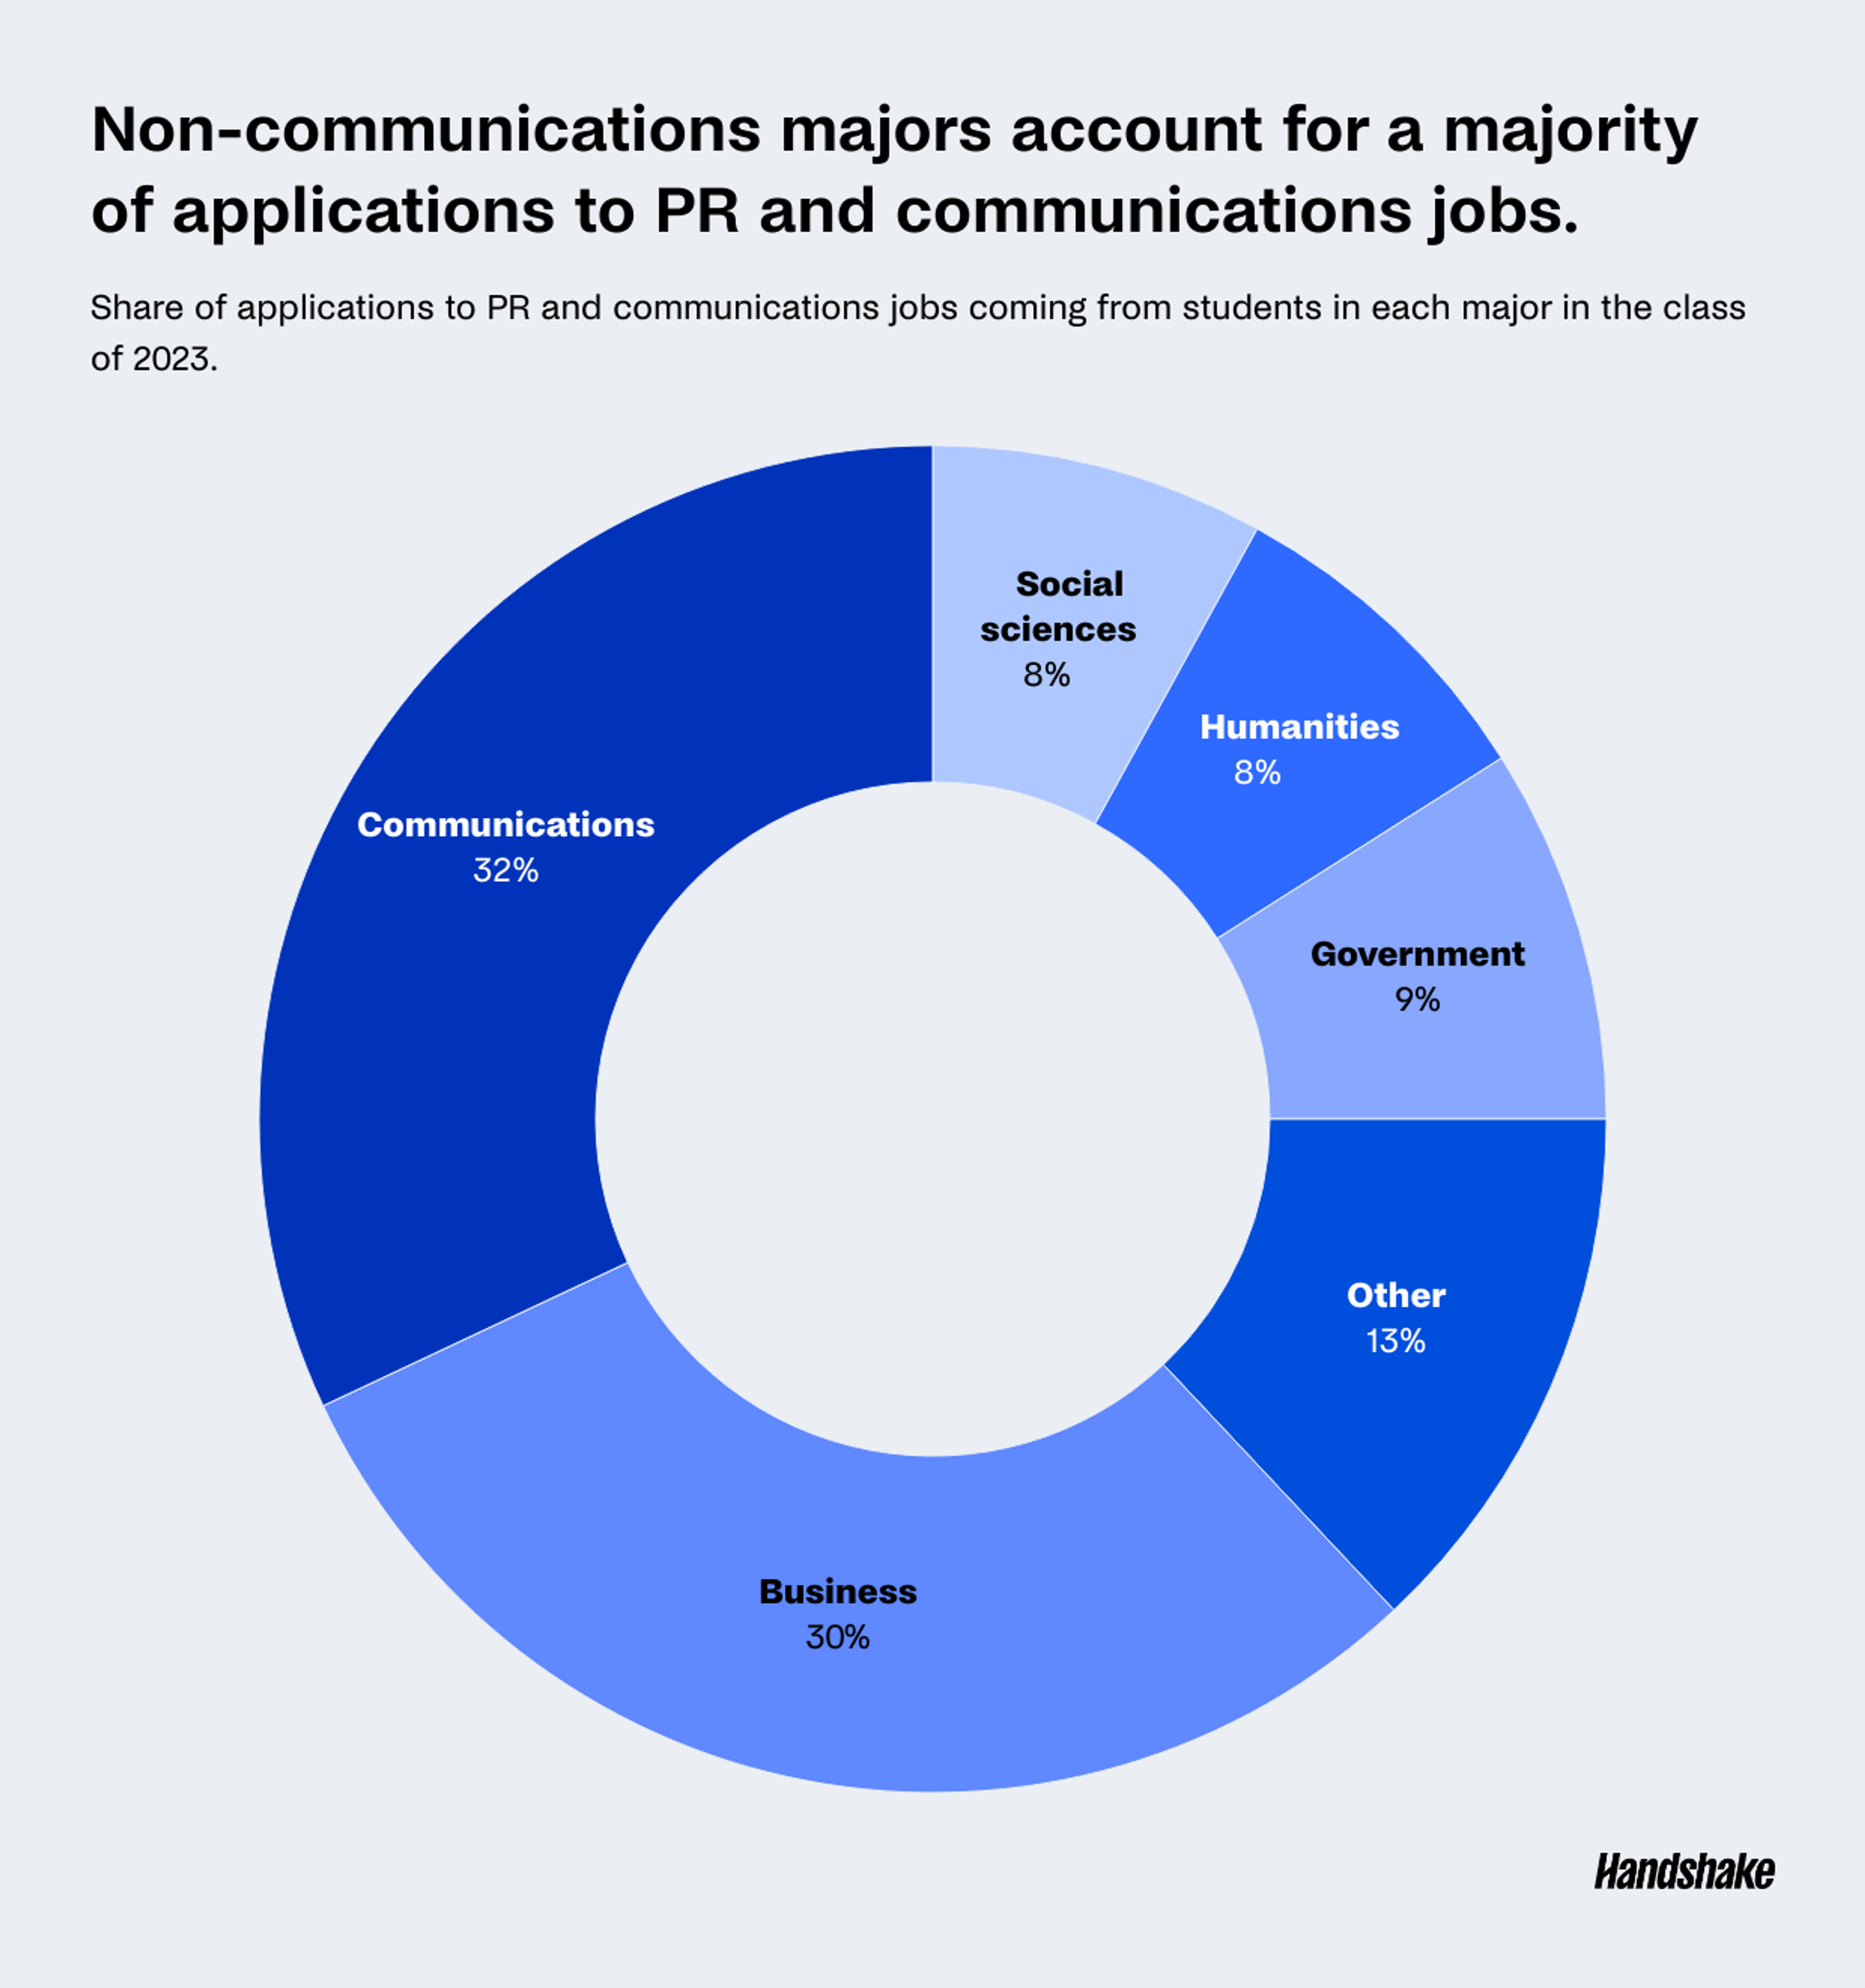 Donut chart showing the share of applications to PR jobs that come from students majoring in various fields. Communications majors account for 32% of applications, business majors 30%, Government 9%, Humanities 8%, social sciences 8%, and other 13%. 